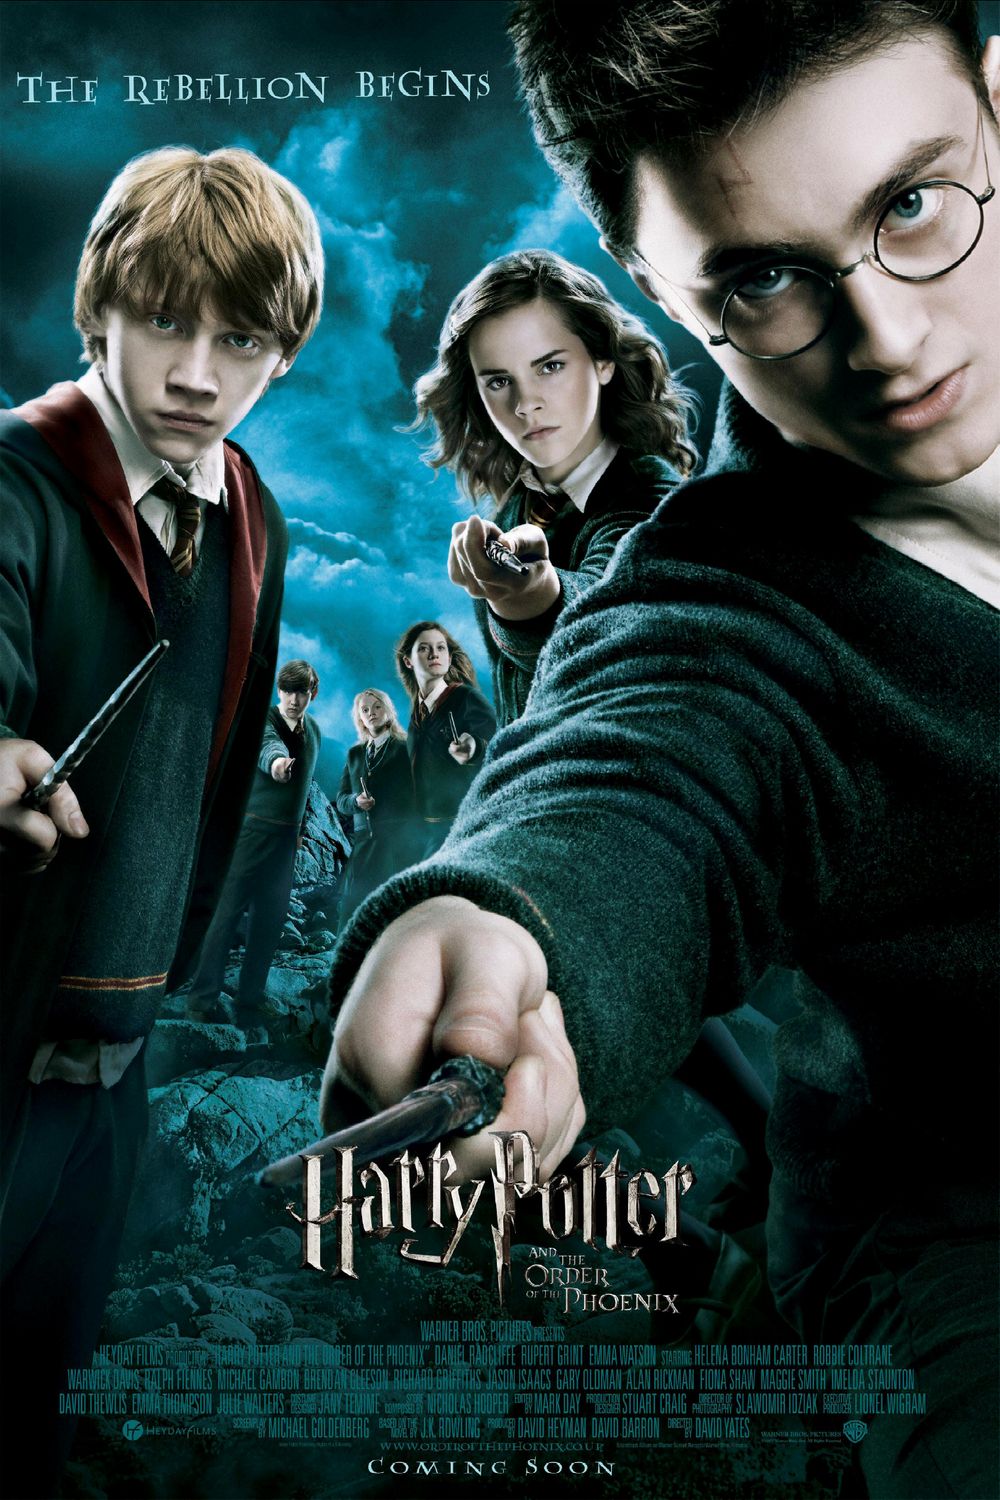 FULL MOVIE: Harry Potter and the Order of the Phoenix (2007)